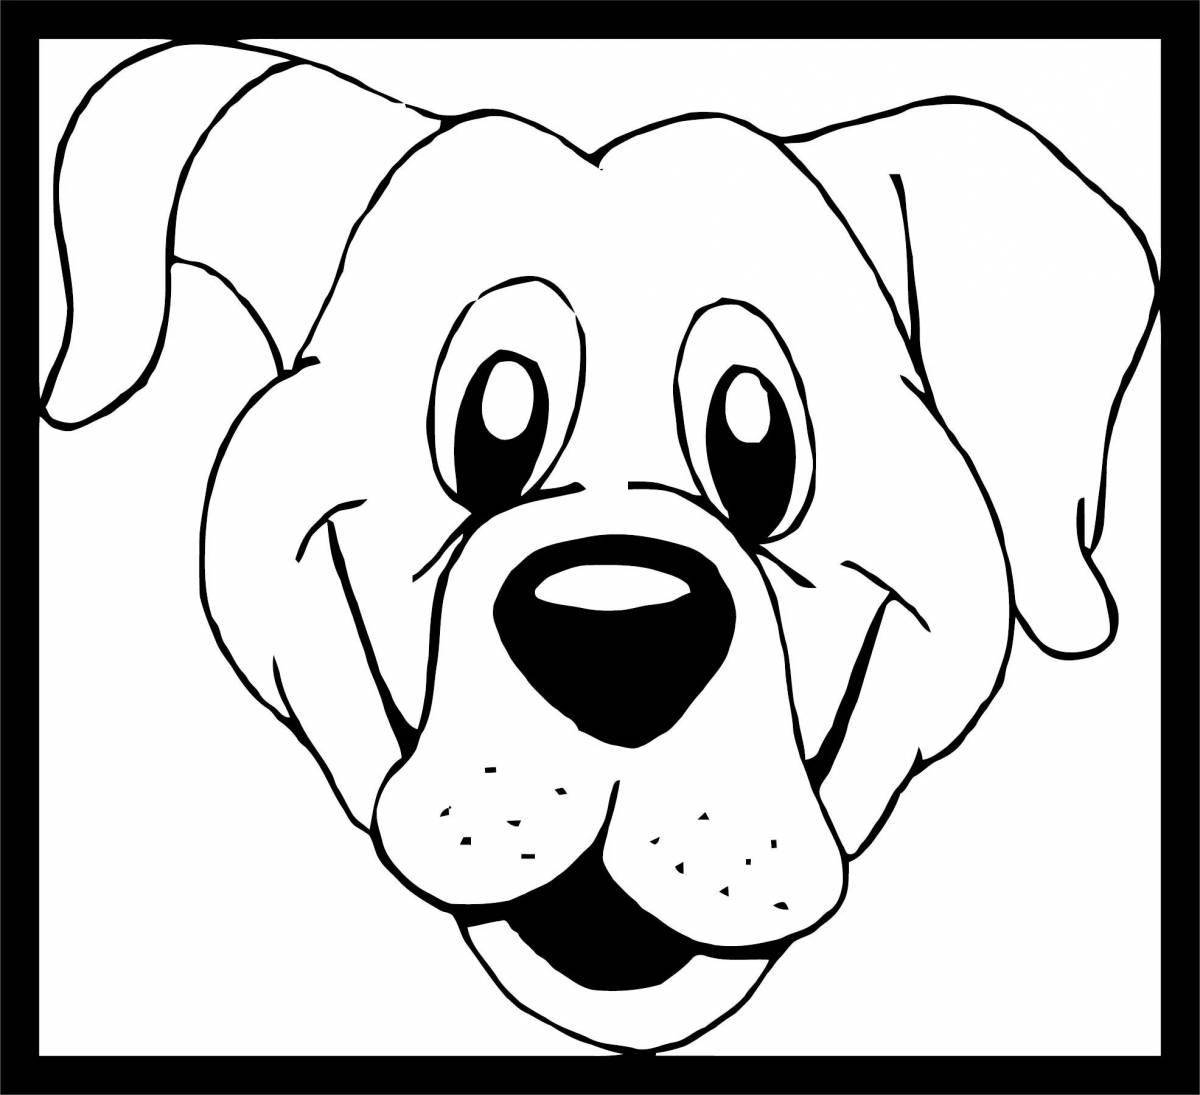 Colorful dog head coloring page